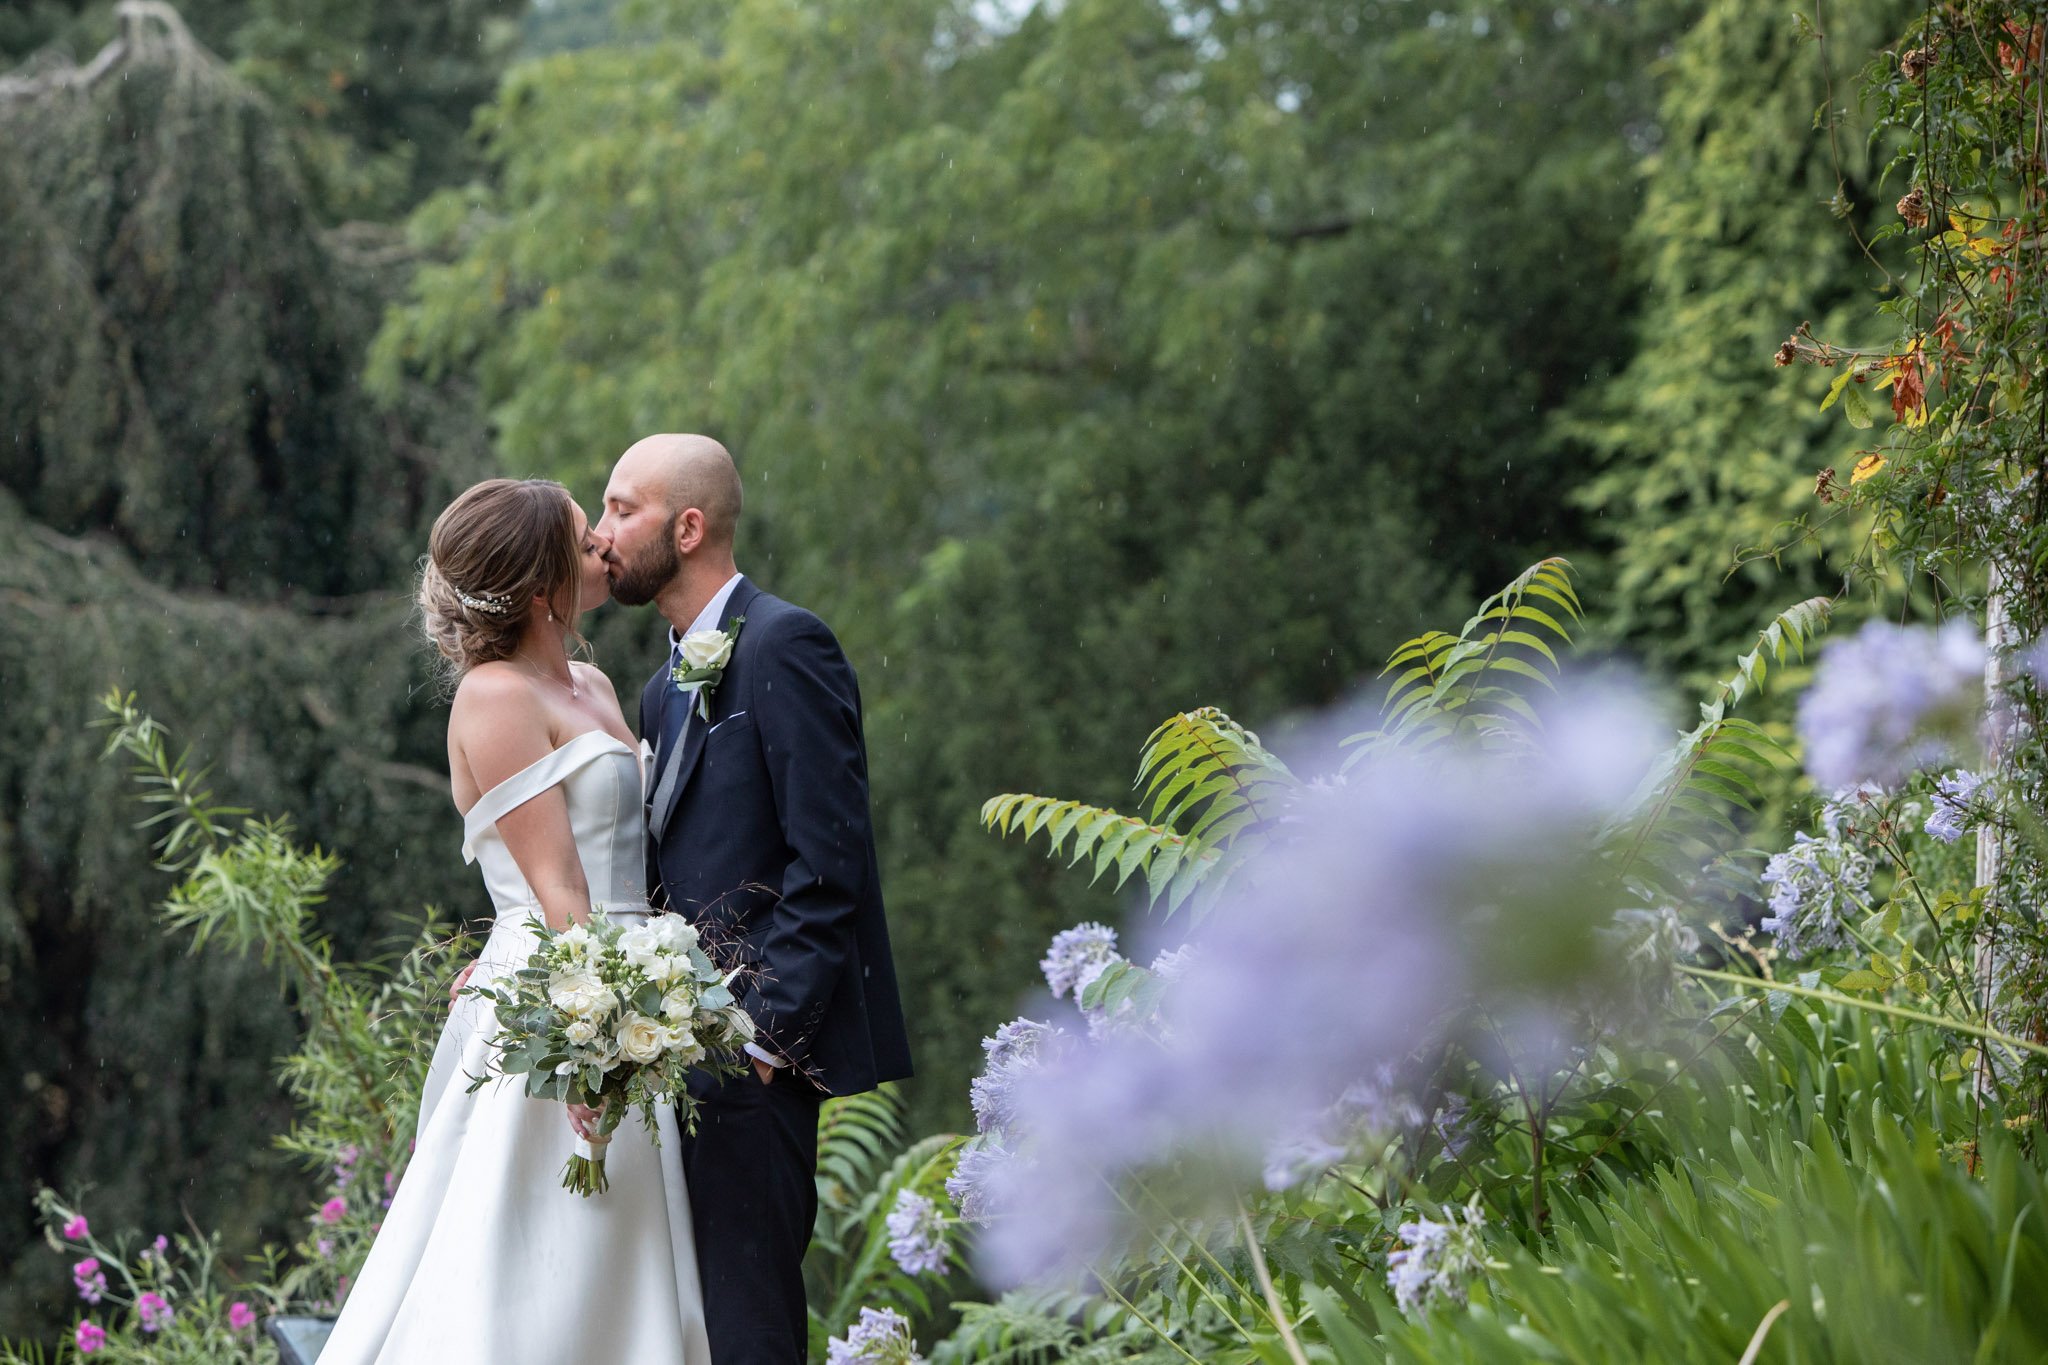 Couple kissing in wedding venue grounds, St Audries Park